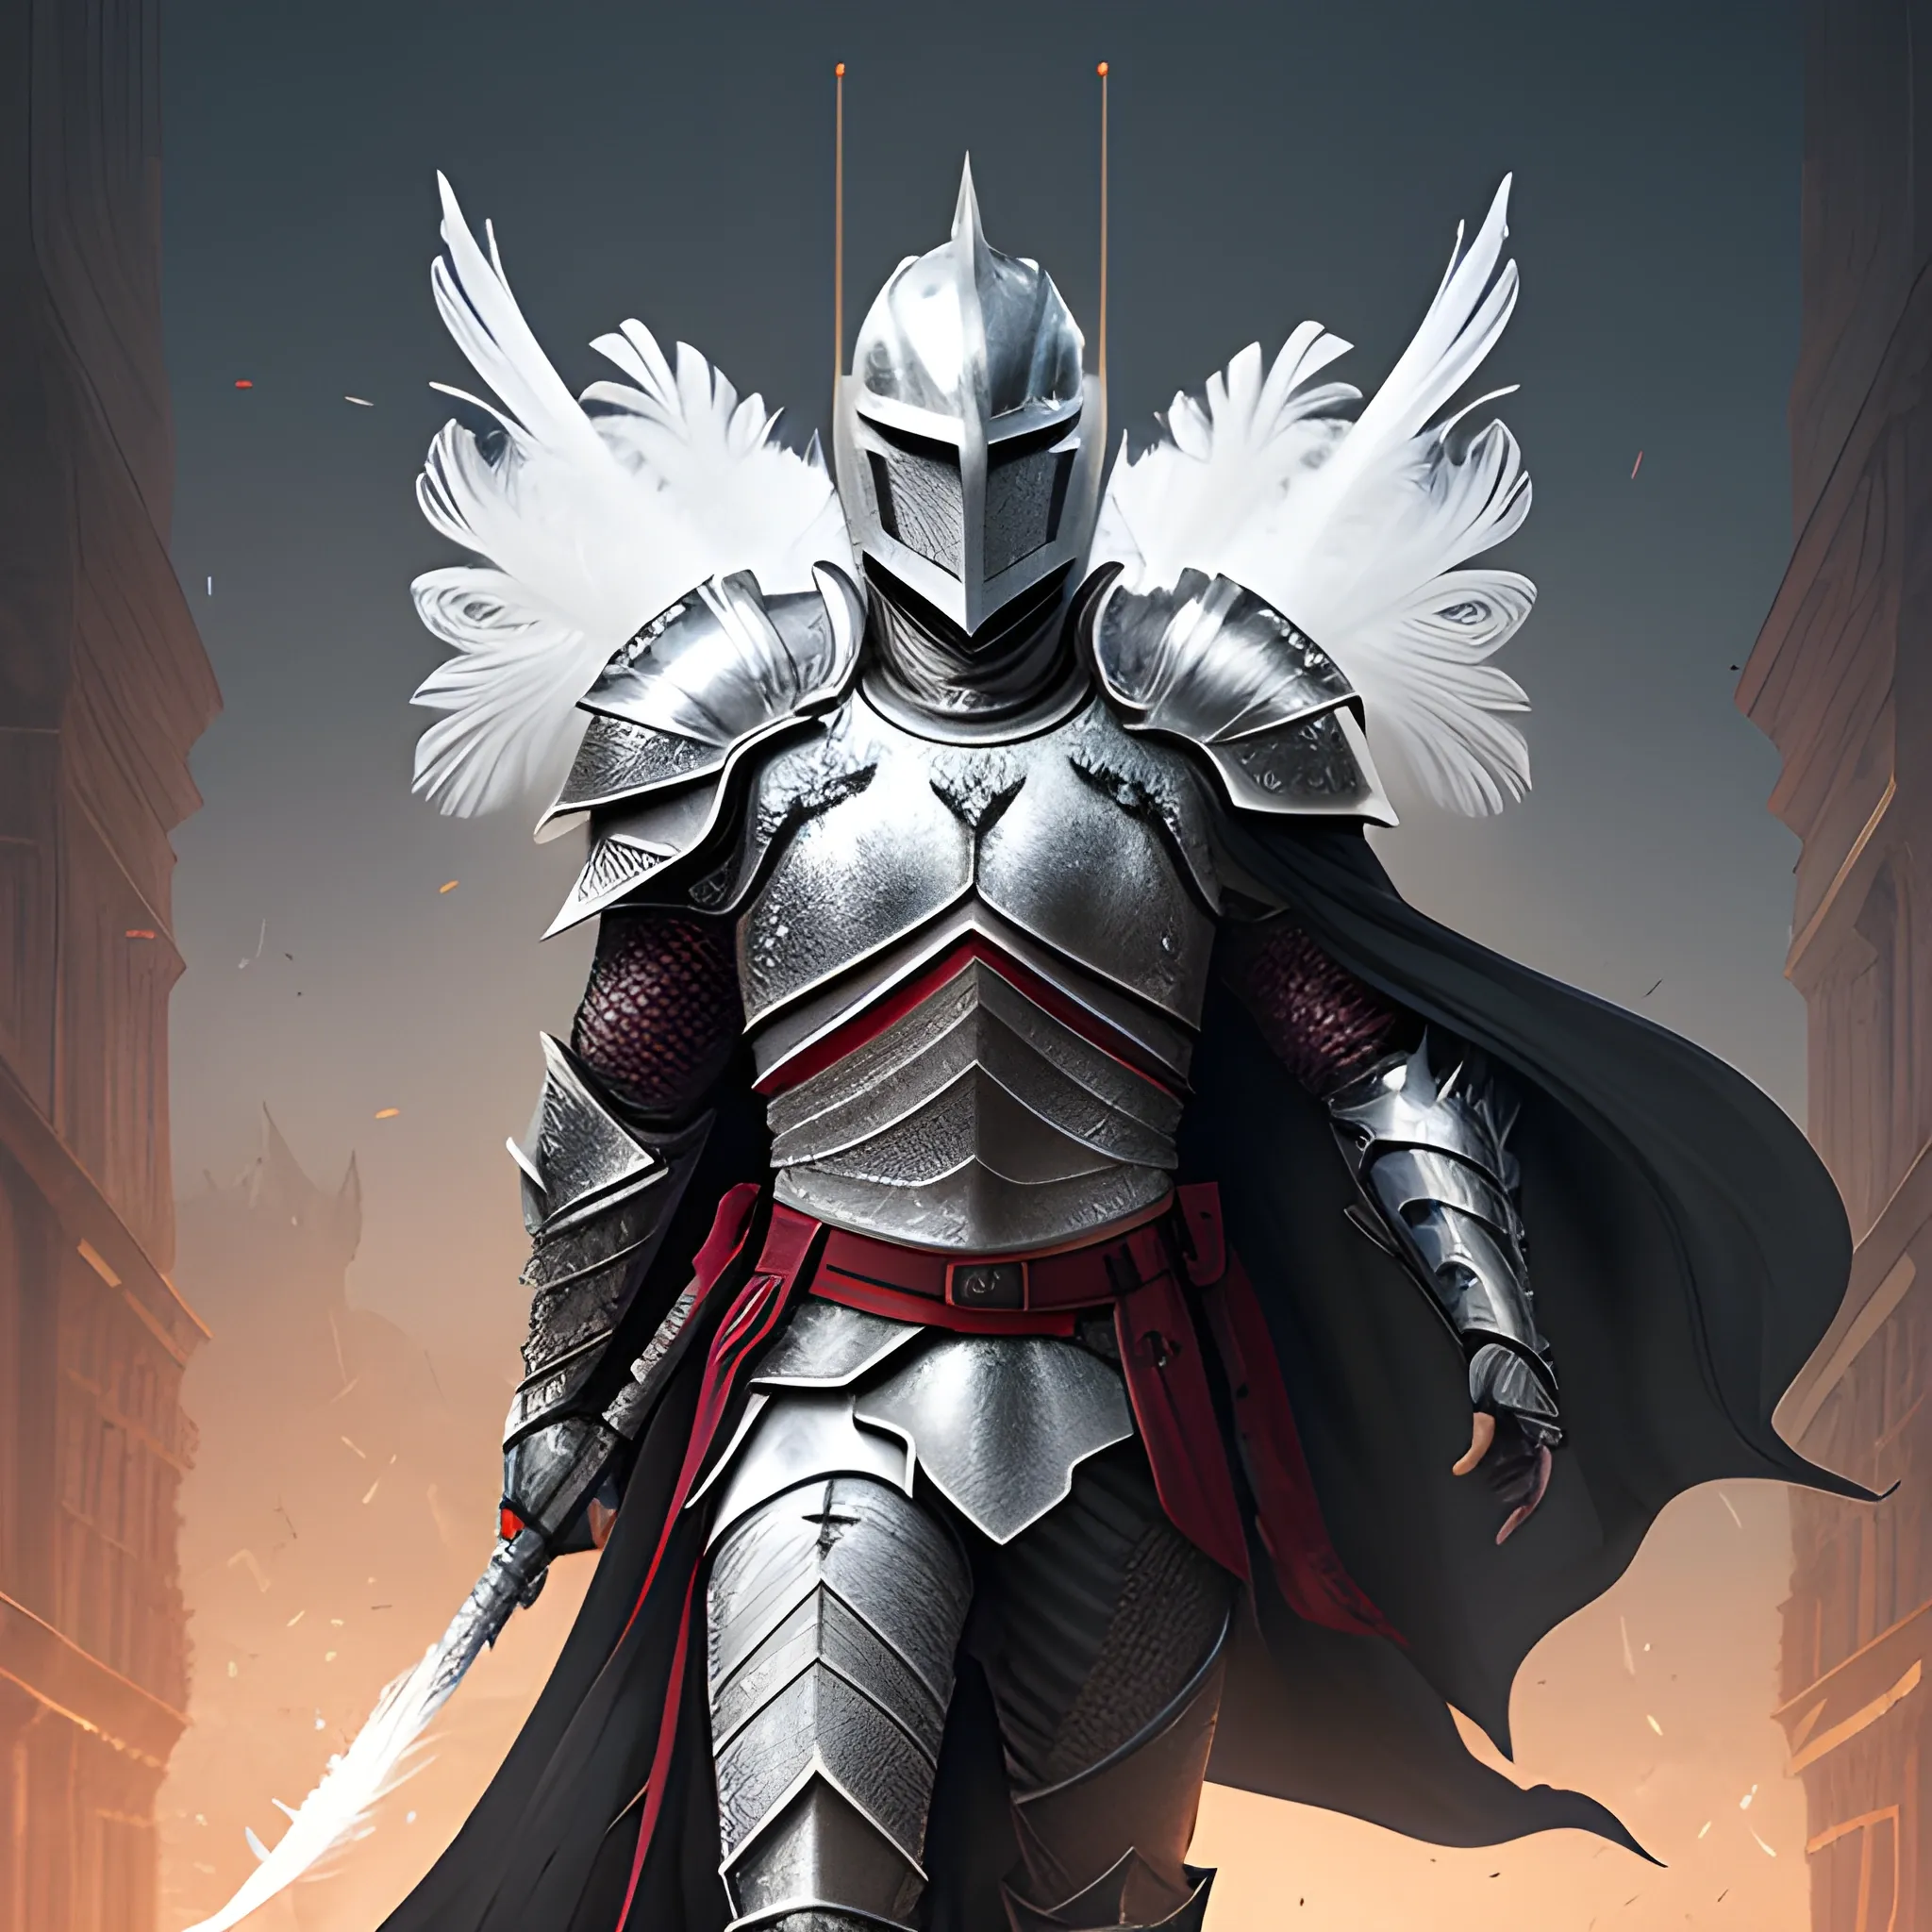 The poster depicts a white knight with intricate feather details and hints of red in the armor. The knight has intense red eyes and wears a helmet that resembles a raven, reminiscent of Batman. Their face is illuminated by carefully placed lights that enhance the sharp edges. The background is pure white, emphasizing the knight's presence. With a medium camera angle, this ultra-detailed, 8k concept art captures the knight's unwavering determination in their gaze and expression, showcasing their readiness to protect and fight for justice.